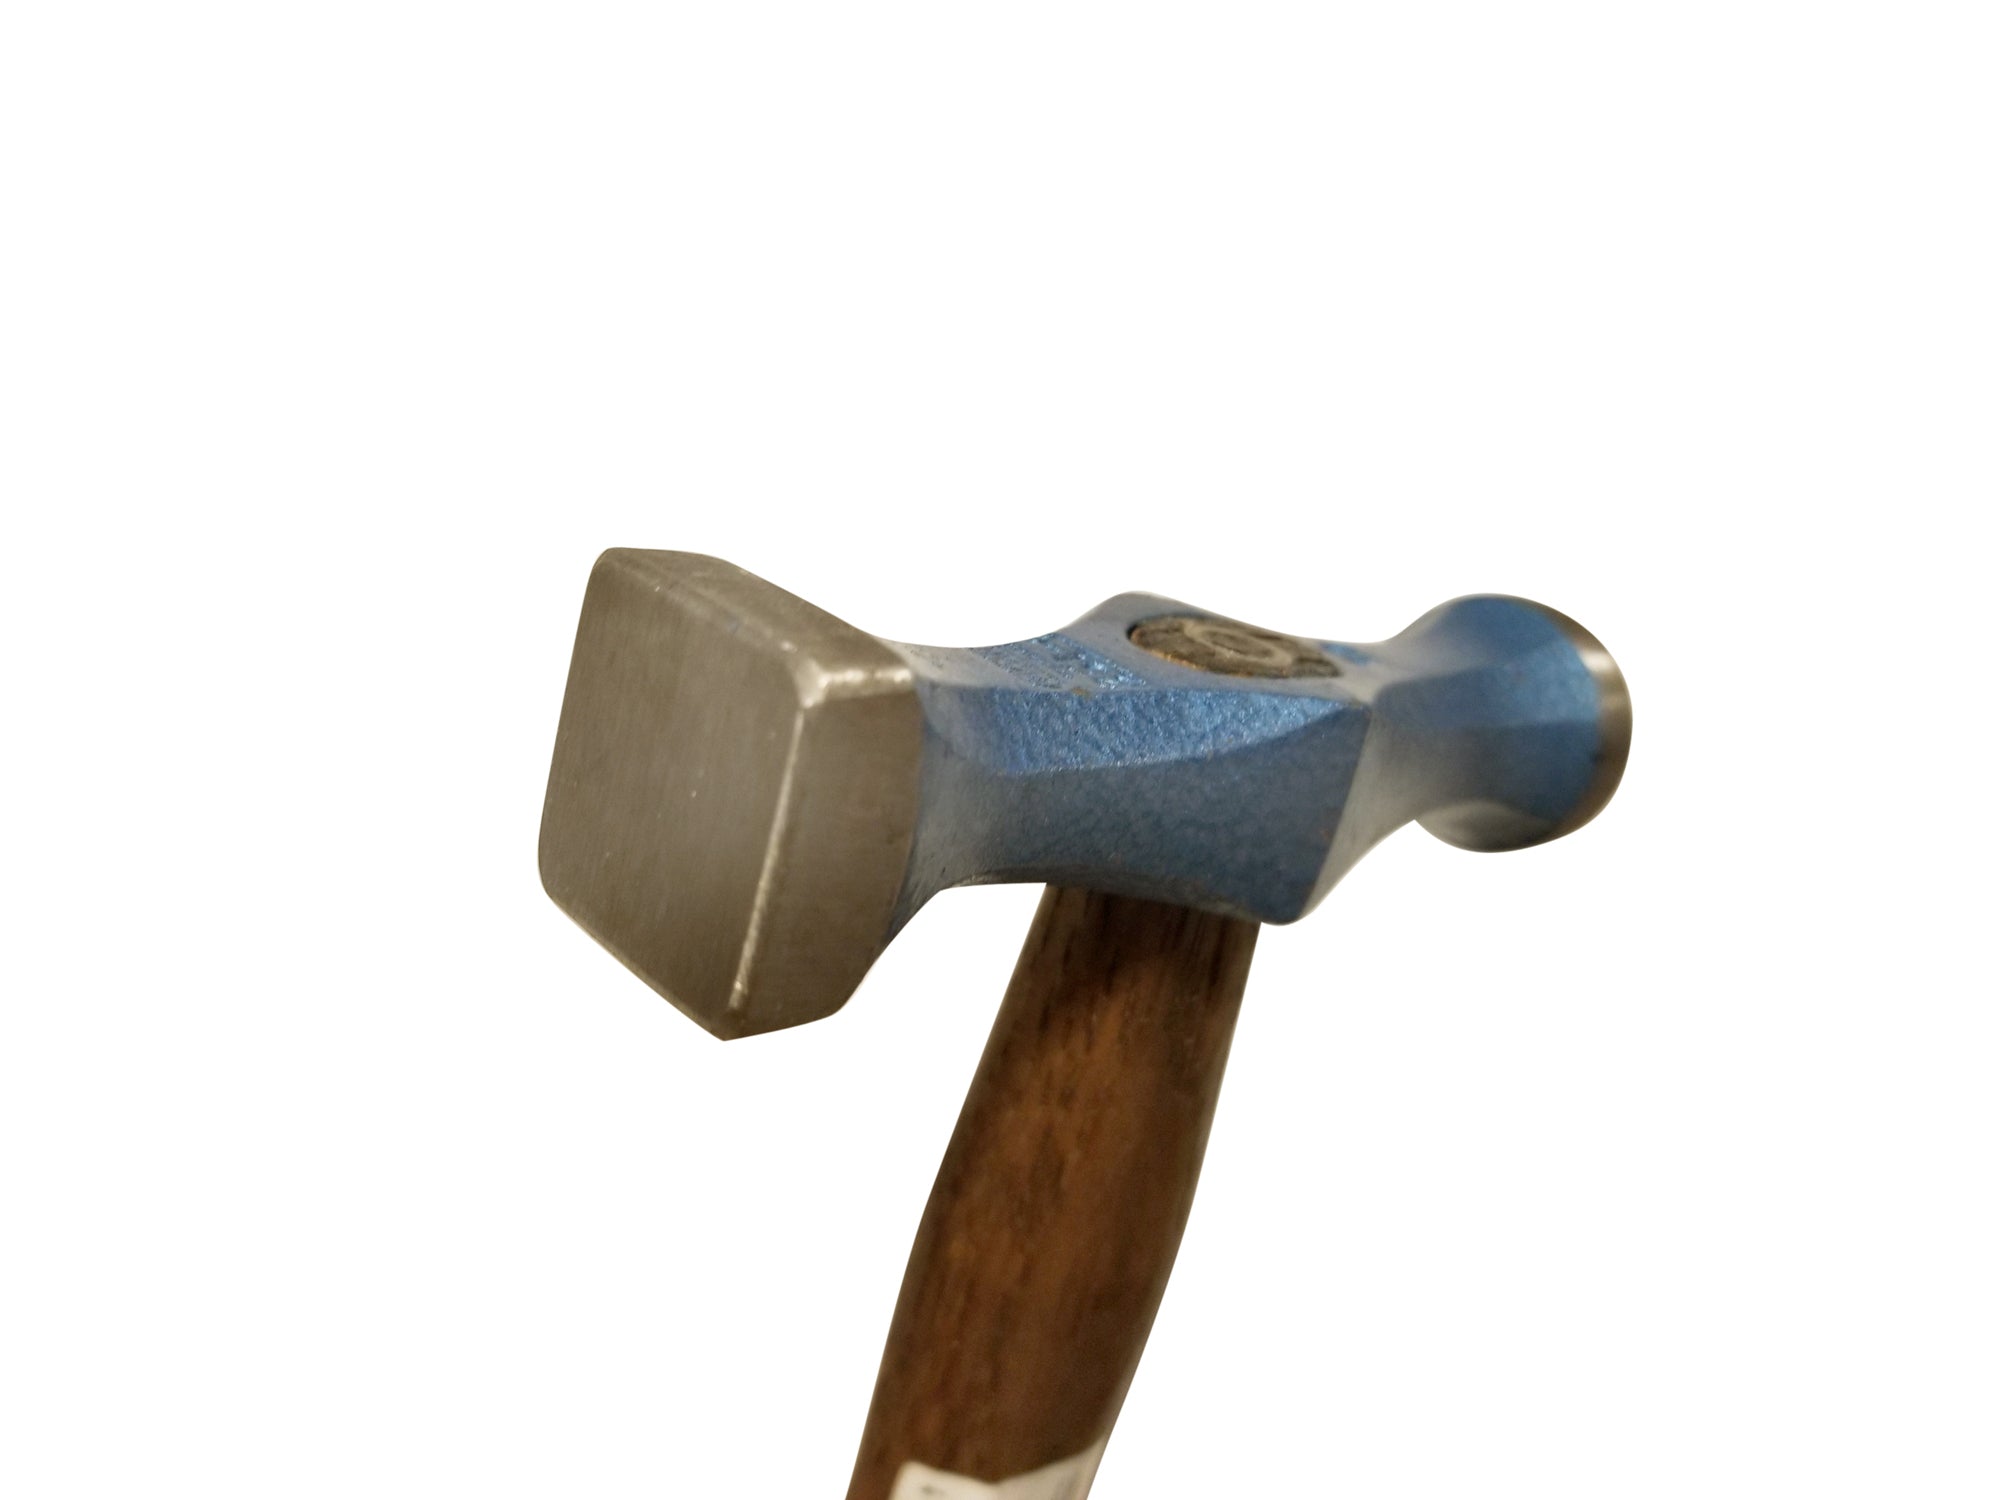 Picard 2510692 Planishing Double Bumping Hammer - Hanks Hammers